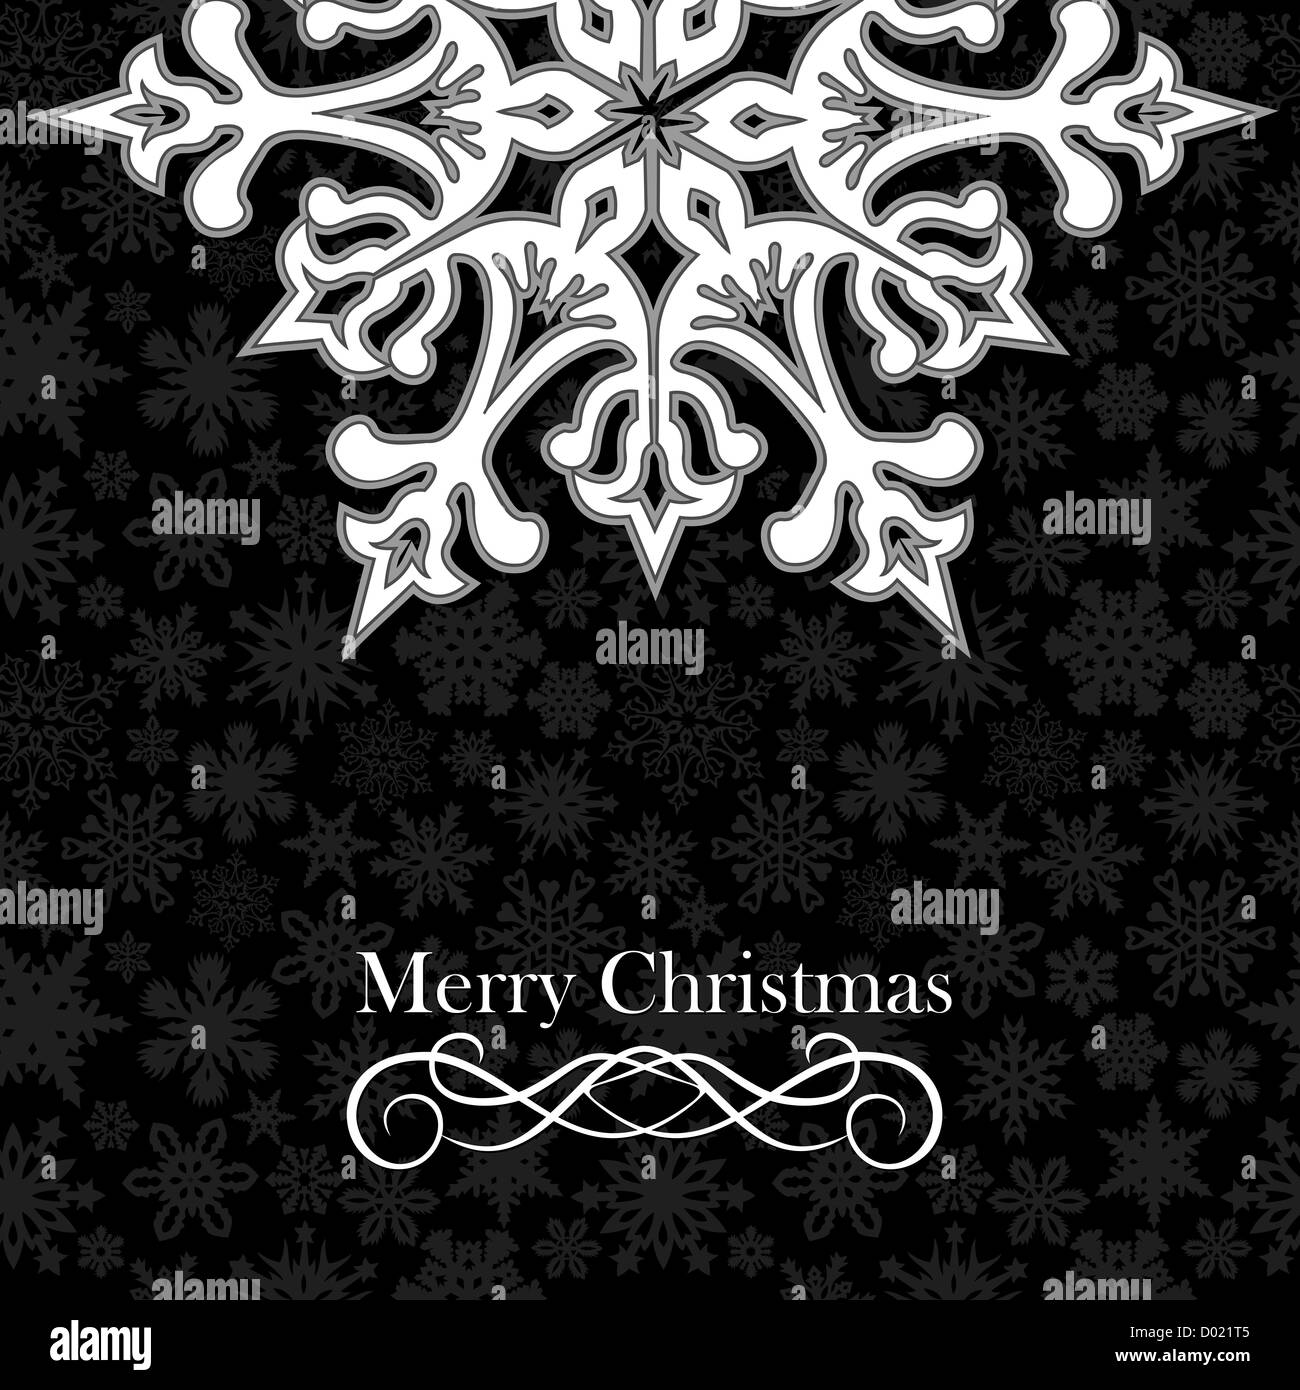 Christmas snowflakes greeting card over seamless pattern. Vector illustration layered for easy manipulation and custom coloring. Stock Photo